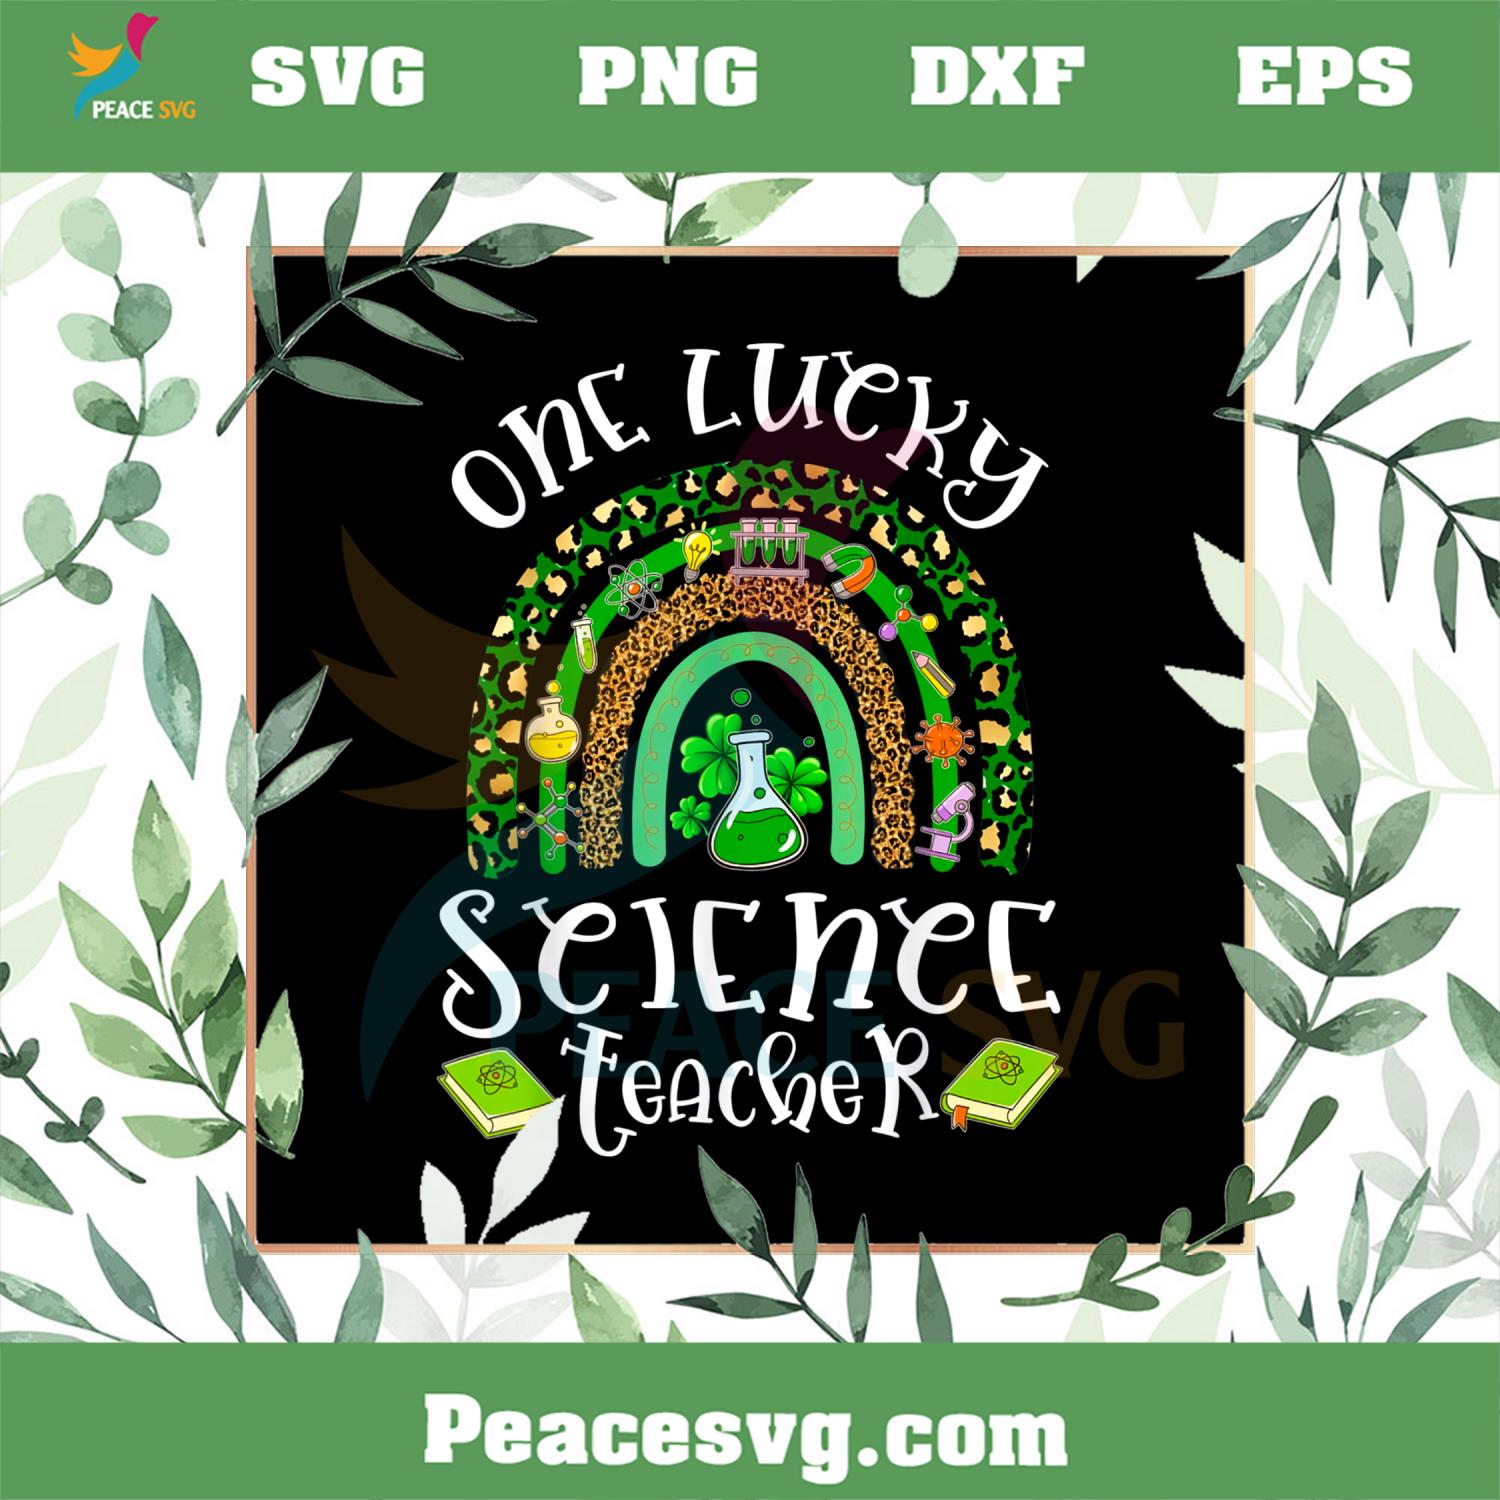 One Lucky Science Teacher PNG Rainbow St Patrick’s Day Shamrock PNG